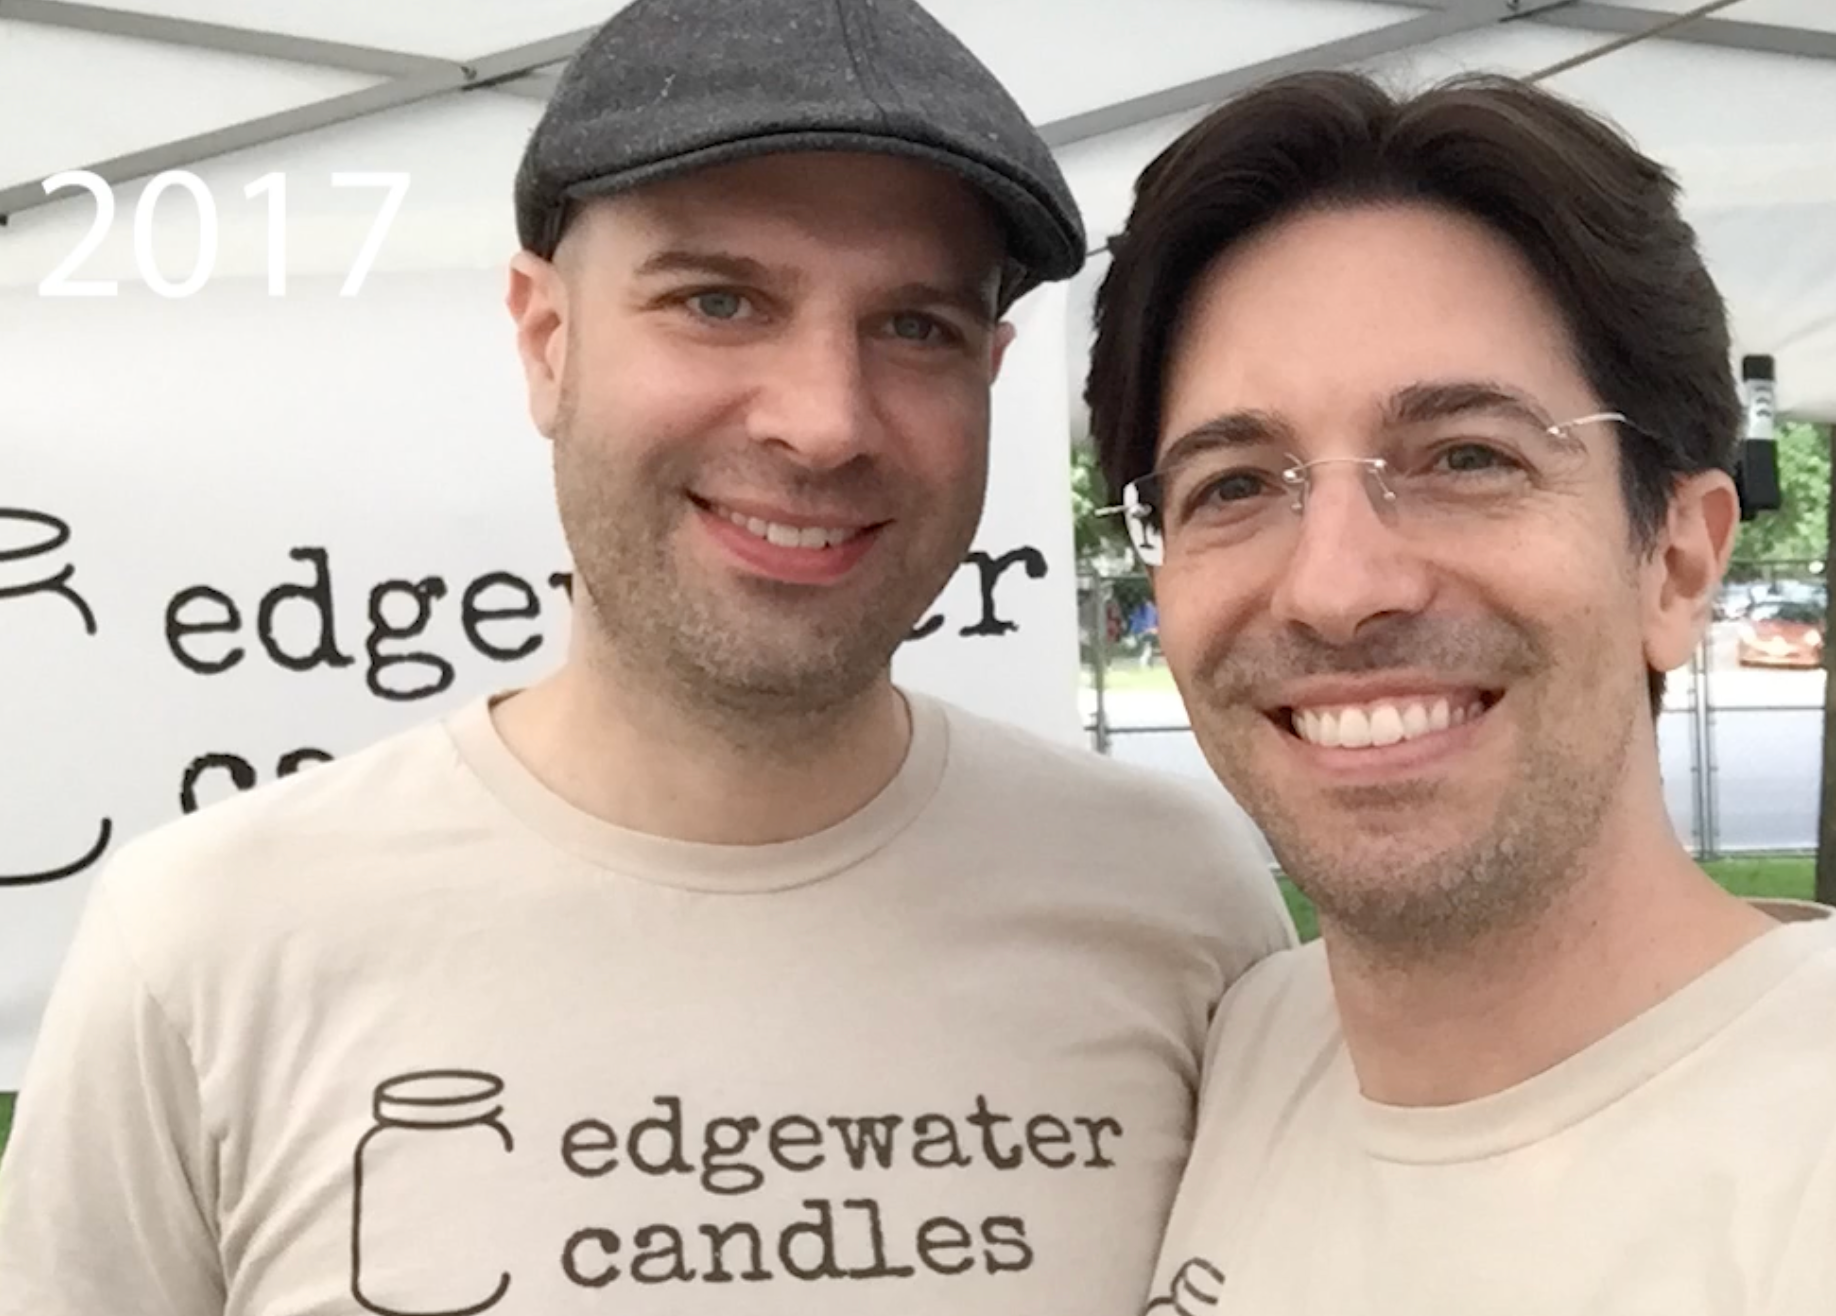 Edgewater Candles turns 7!